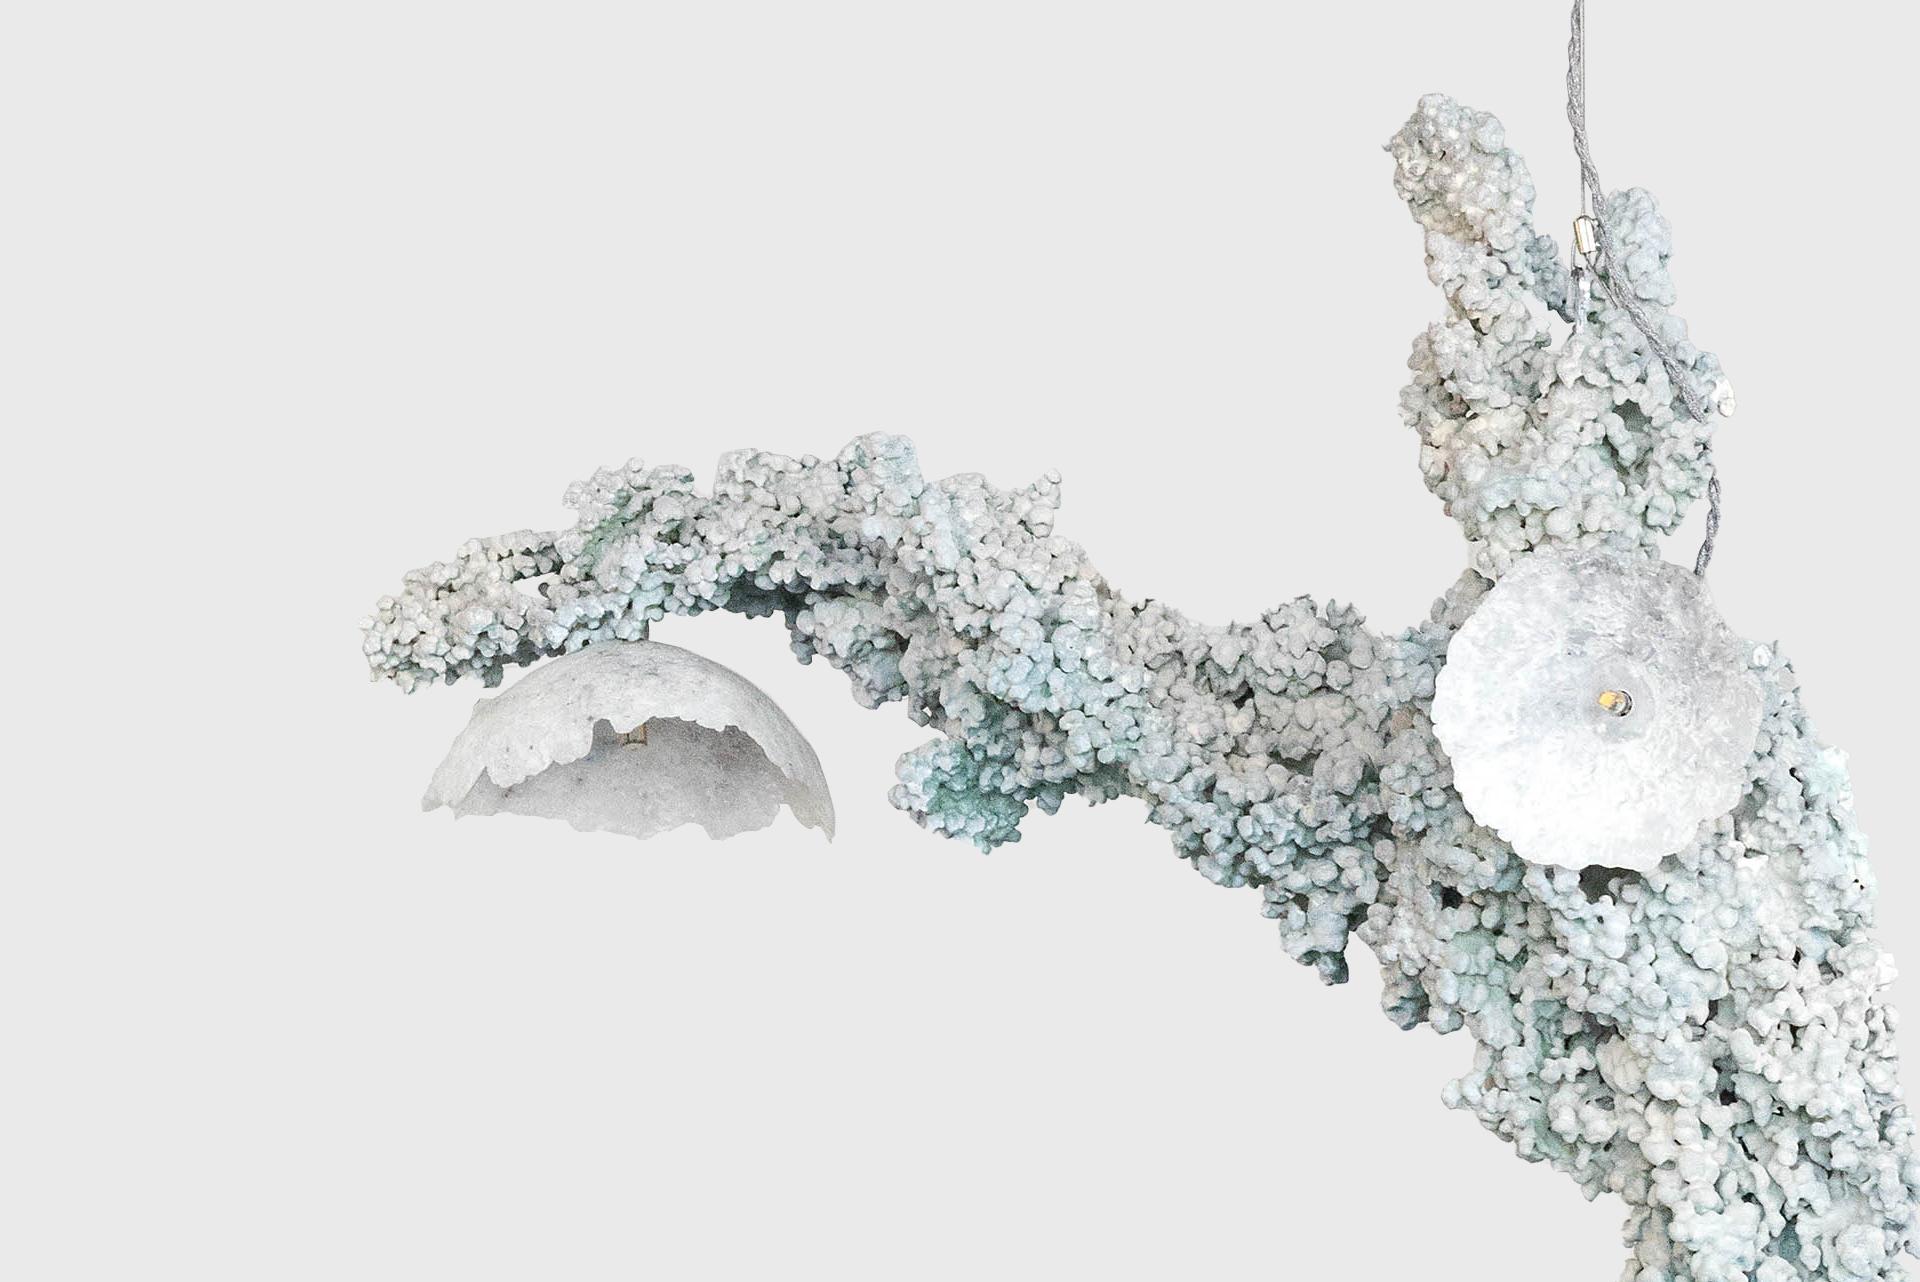 Hanging chandelier model “Verdigris”
From the series “Epilith Lamps”
Manufactured by Elissa Lacoste
France, 2022

Recycled aluminum, acrylic resin,
pigment, marble and quartz powder,
Silicone, electrical components.
3 x G4 12 volts
1 x G9 12